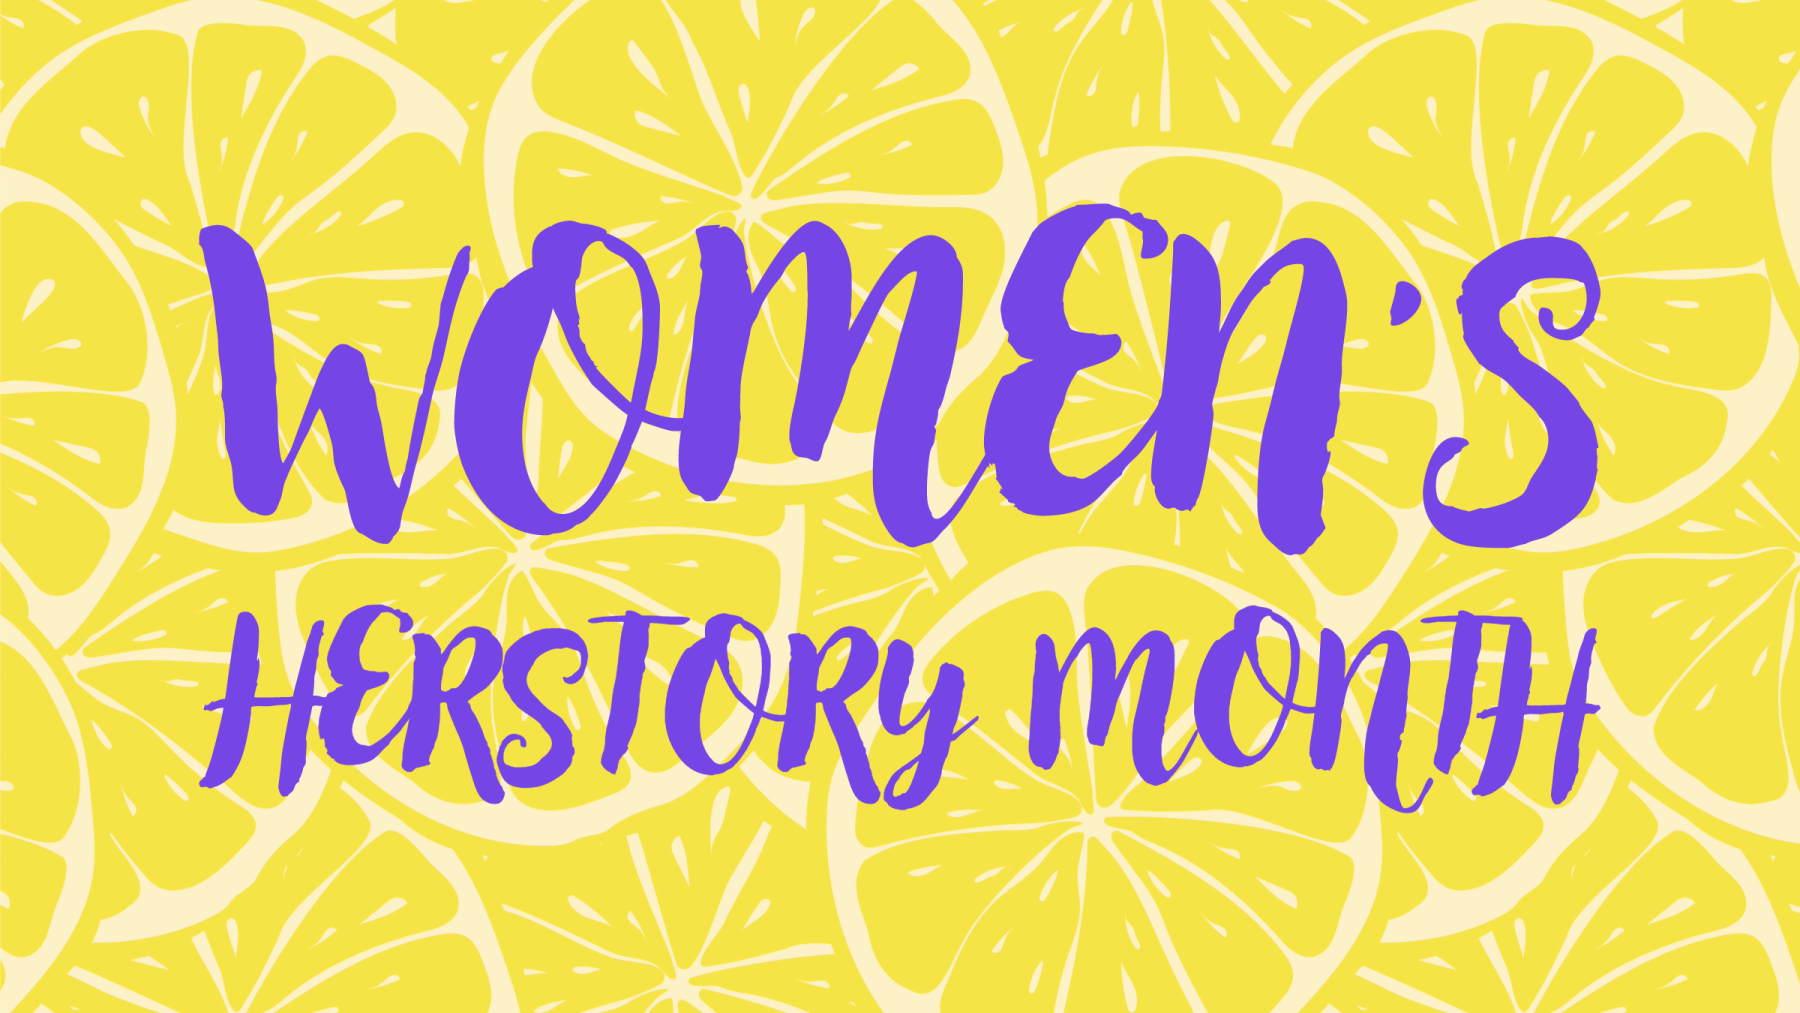 Women's HERstory Month banner in purple handwriting font against a background of yellow lemons